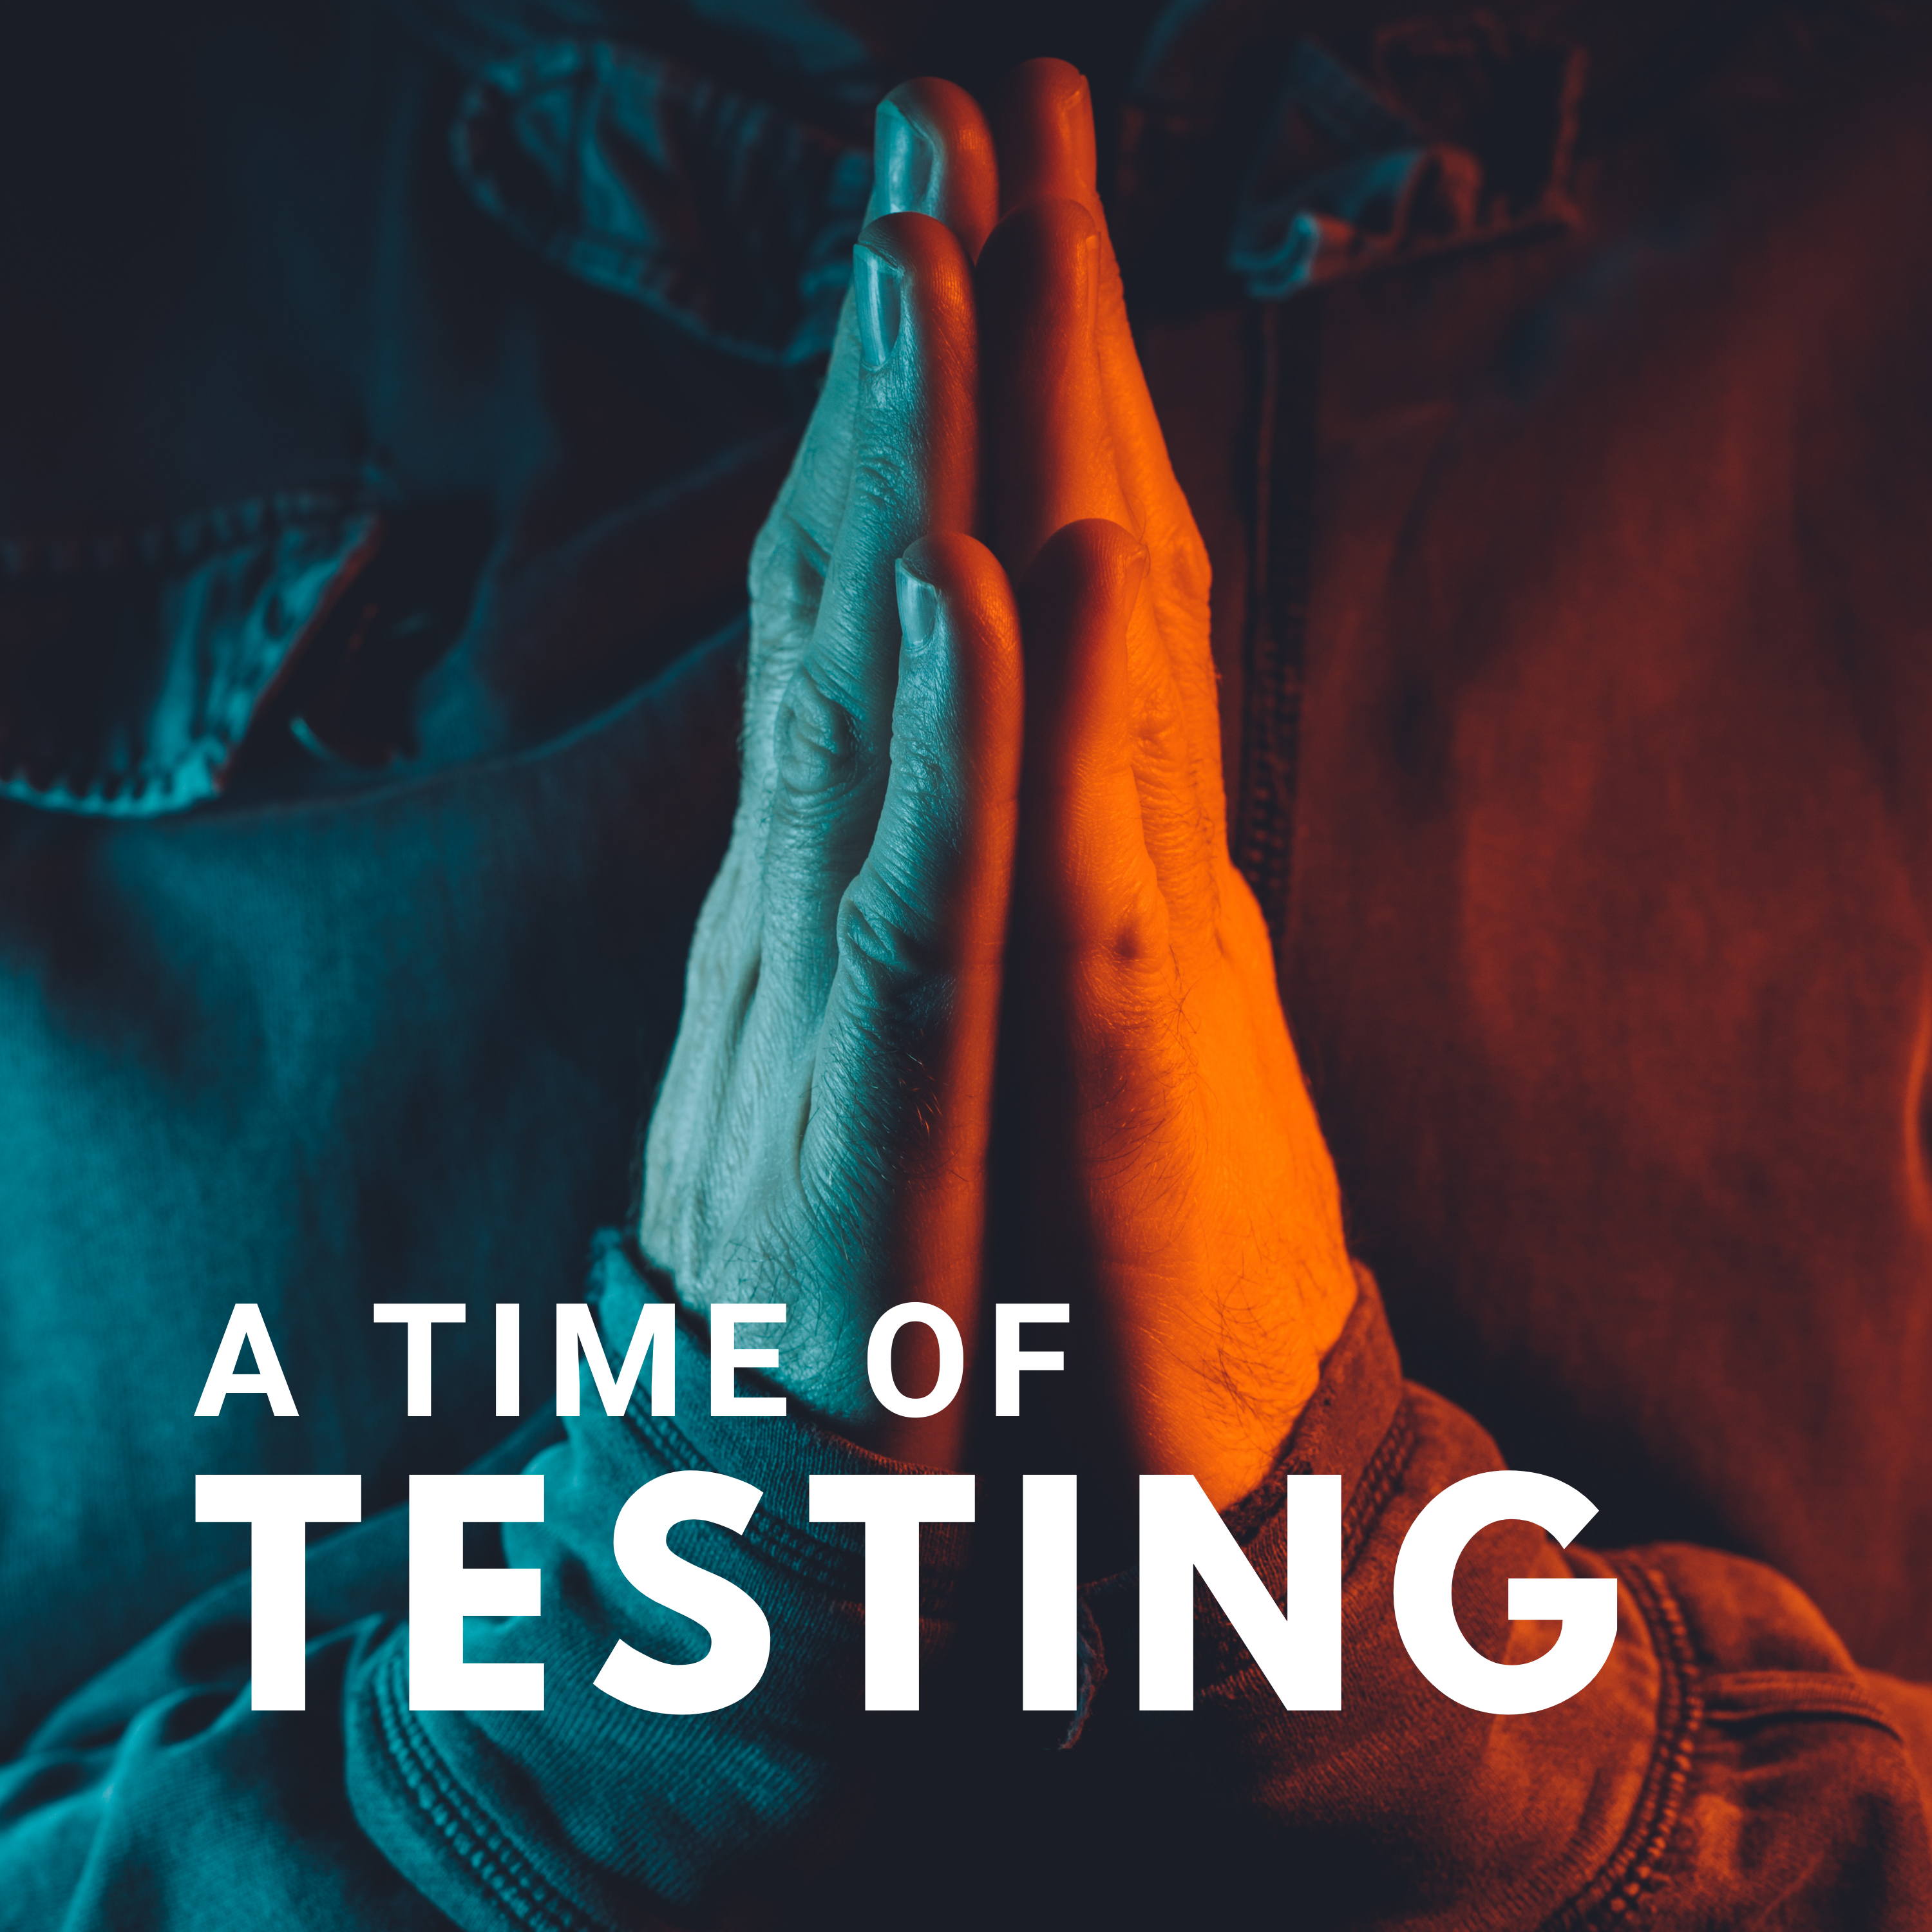 A Time of Testing: Just What You Needed, Right?